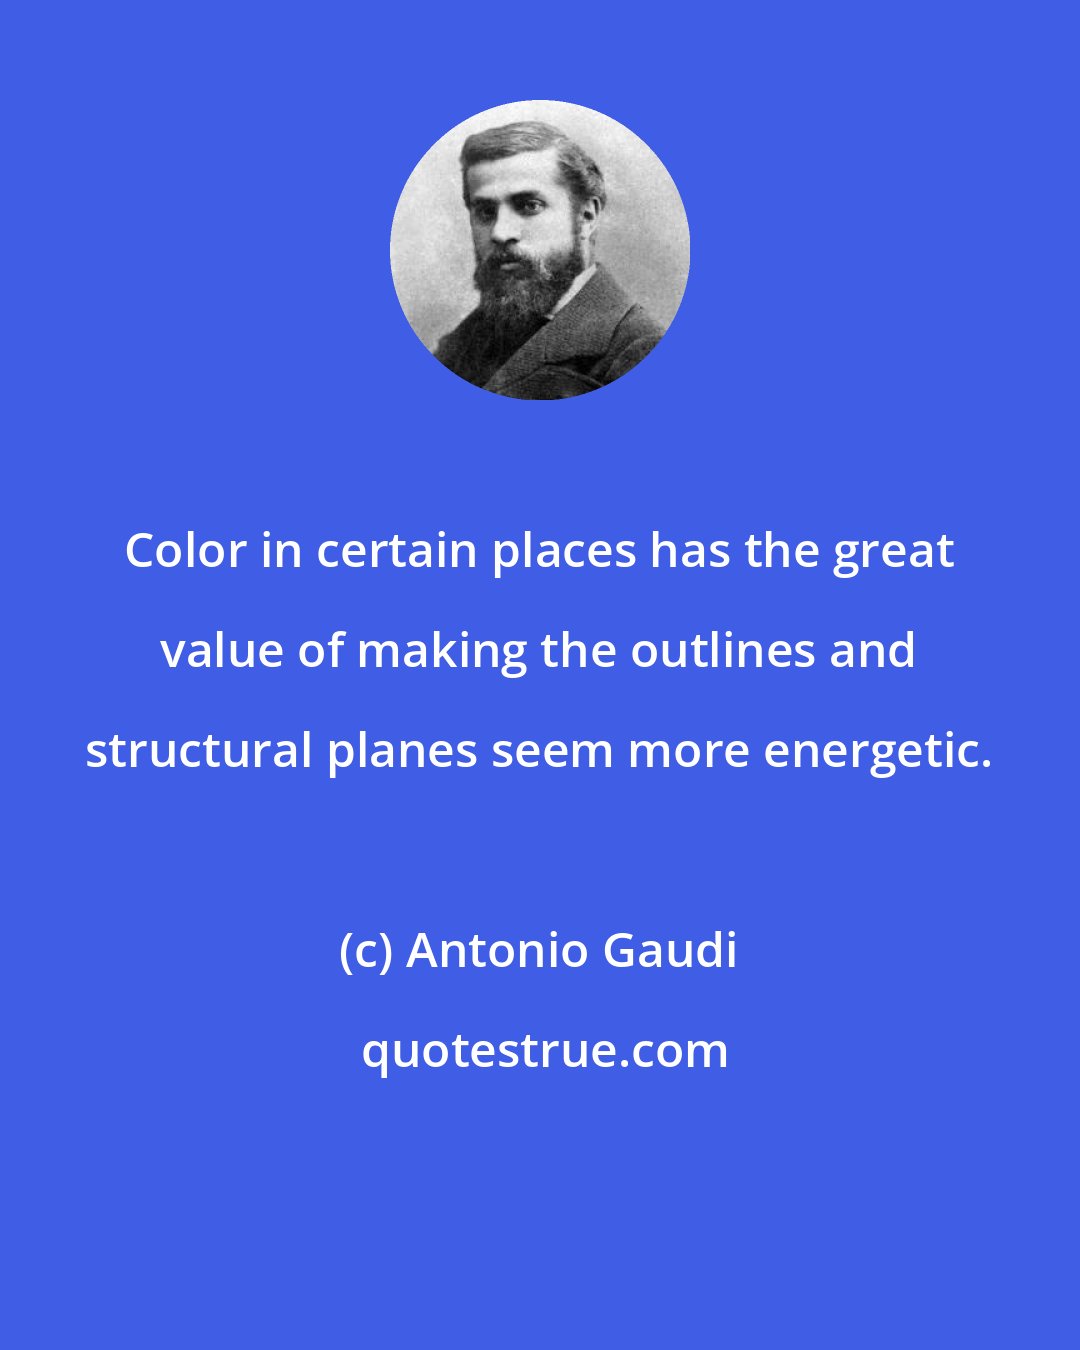 Antonio Gaudi: Color in certain places has the great value of making the outlines and structural planes seem more energetic.